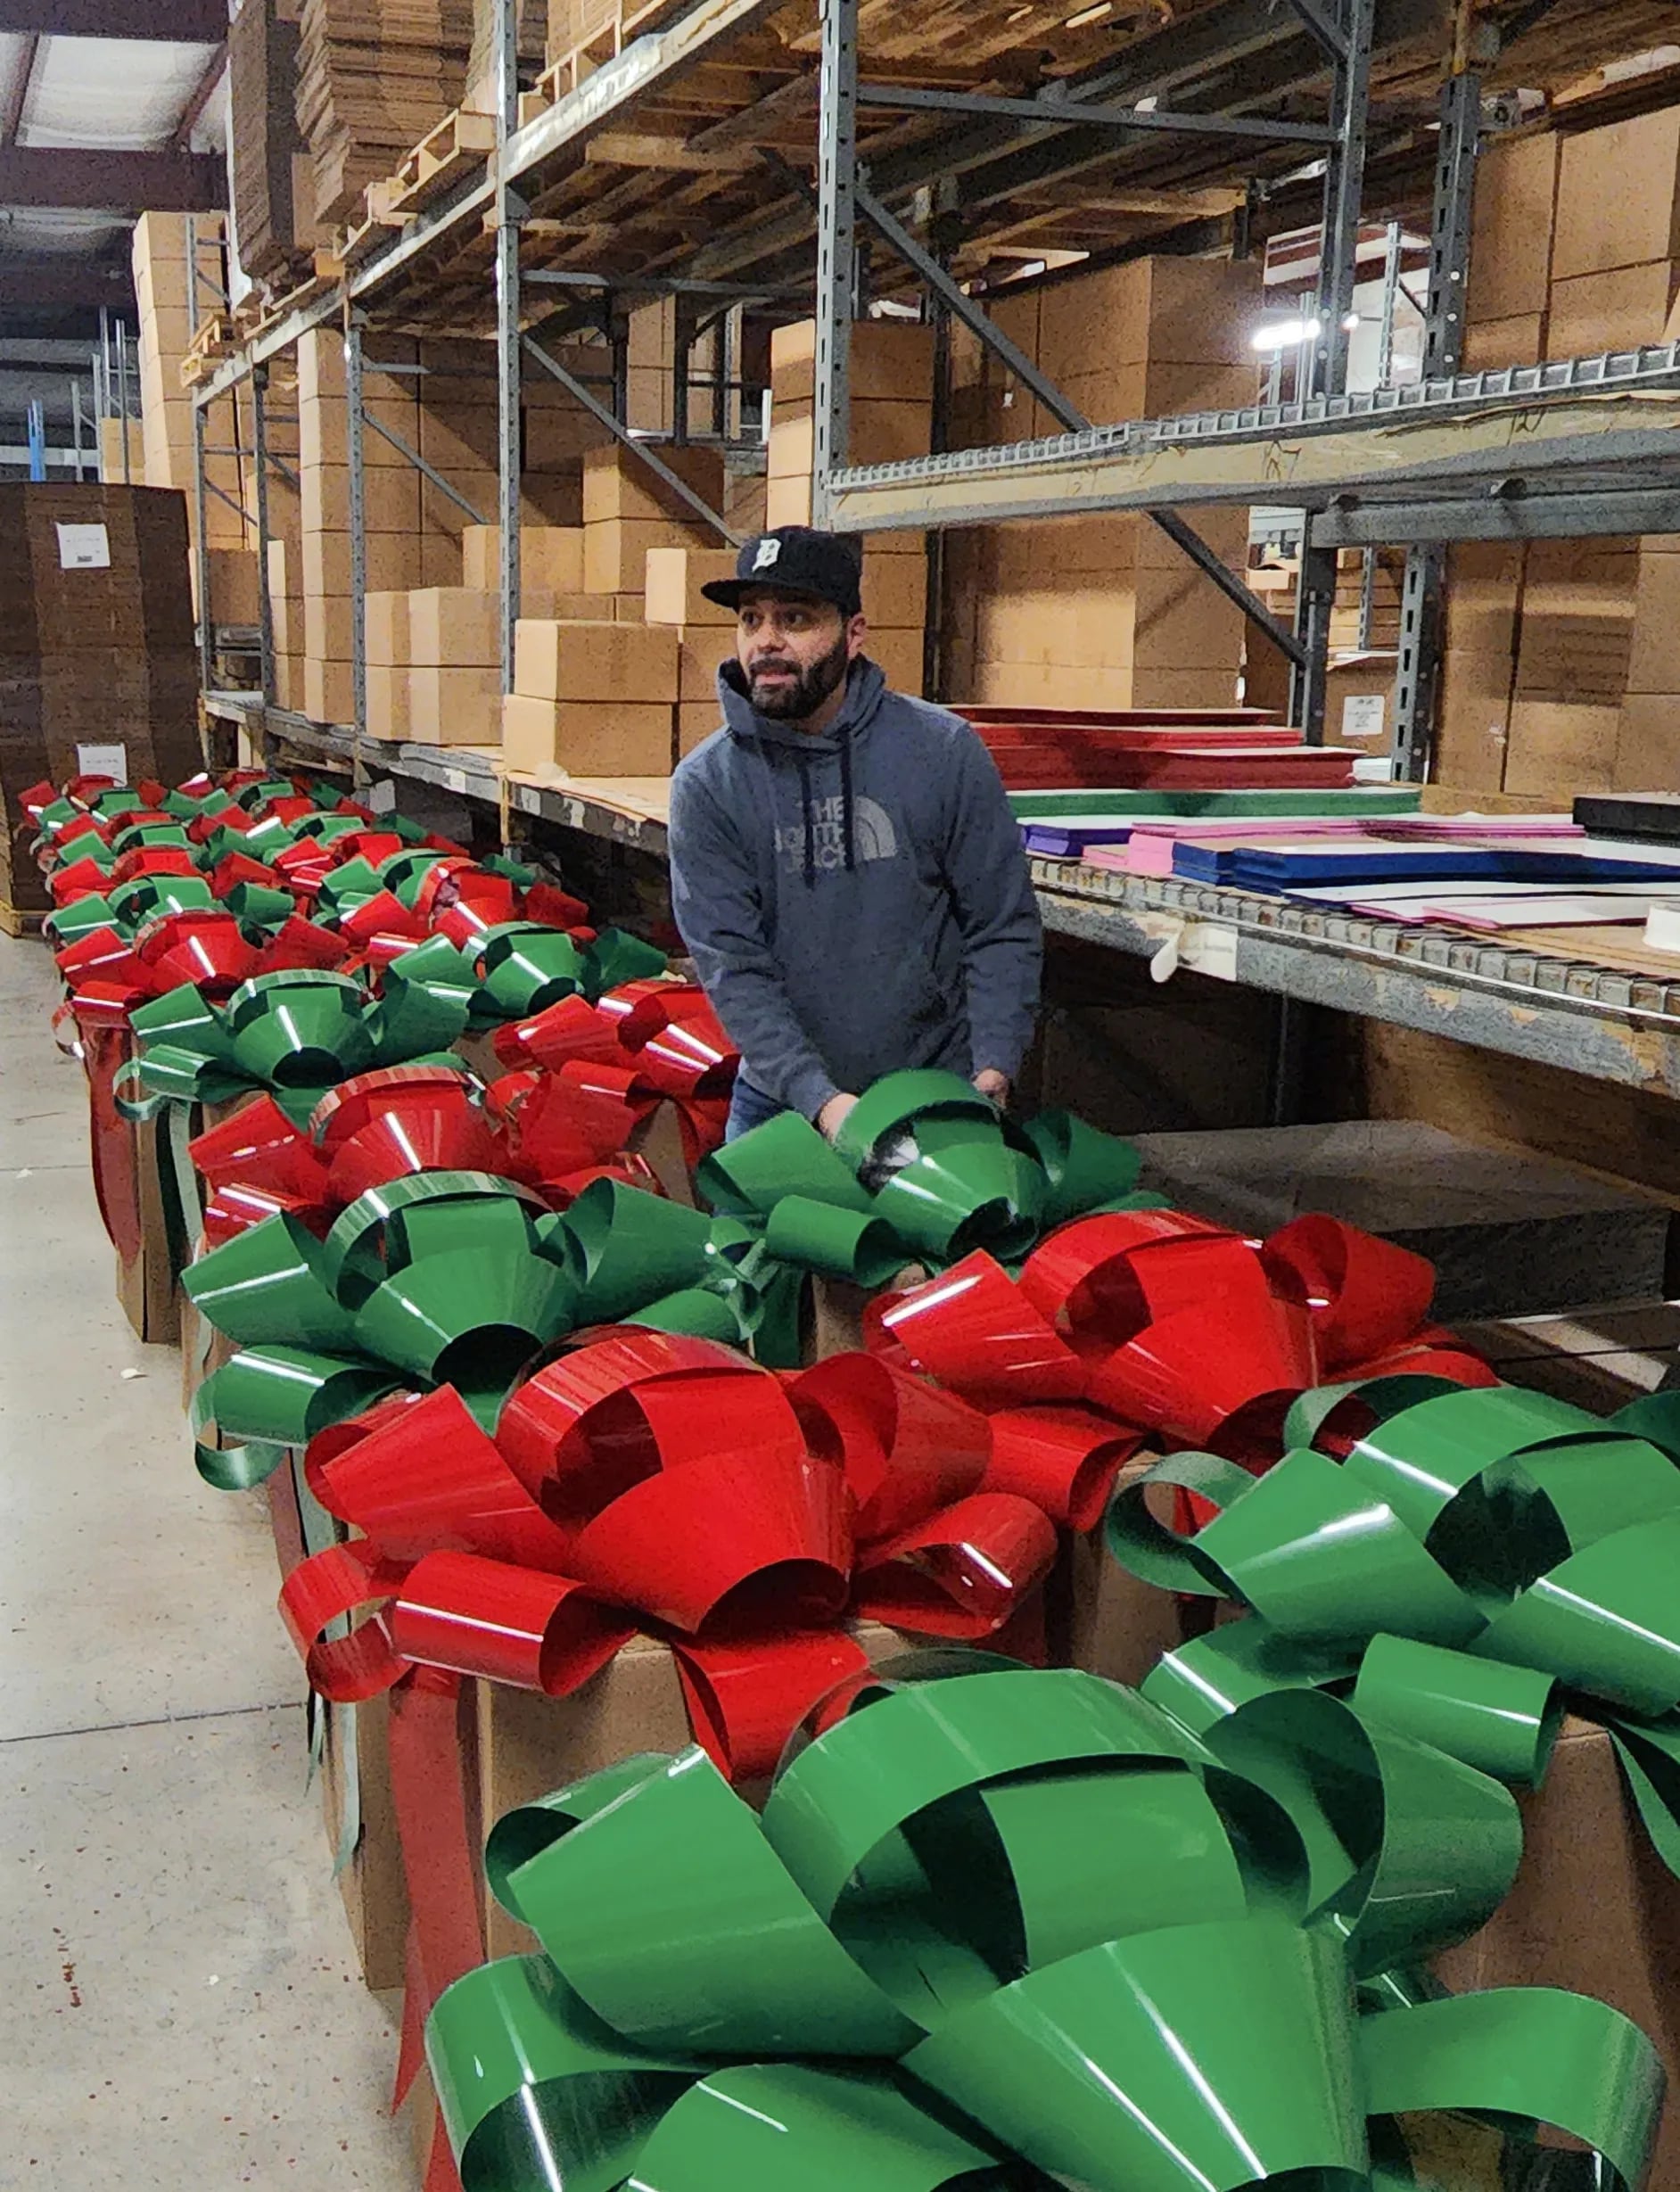 Meet the Person Behind Those Big Red Bows for Cars